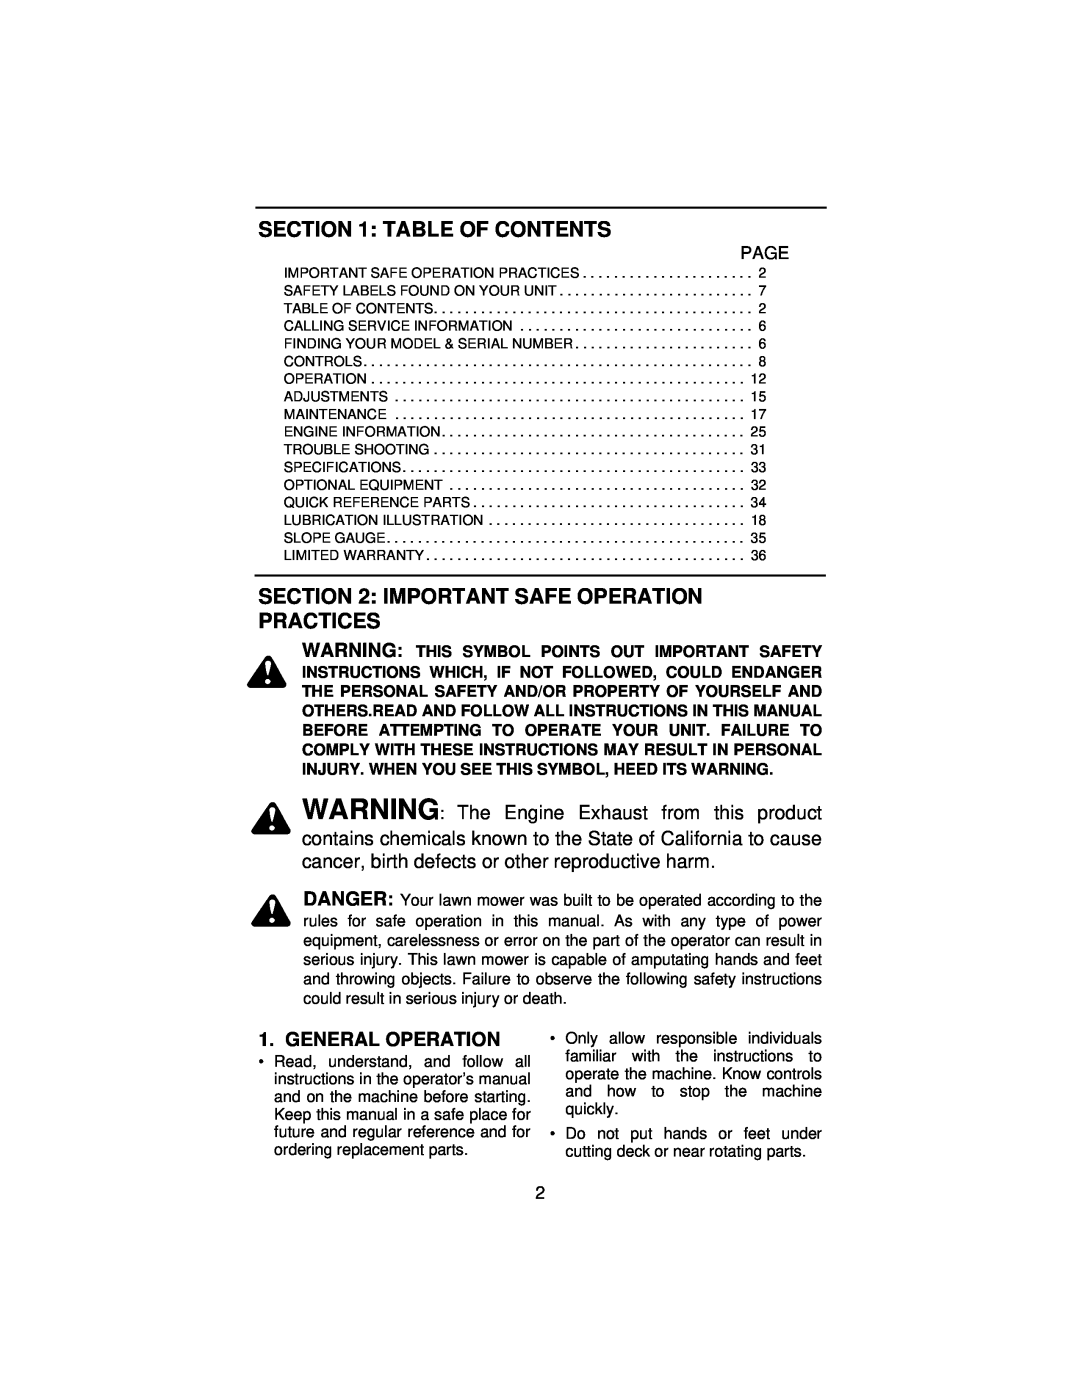 Cub Cadet 3185 manual Table Of Contents, Important Safe Operation Practices, General Operation, Page 